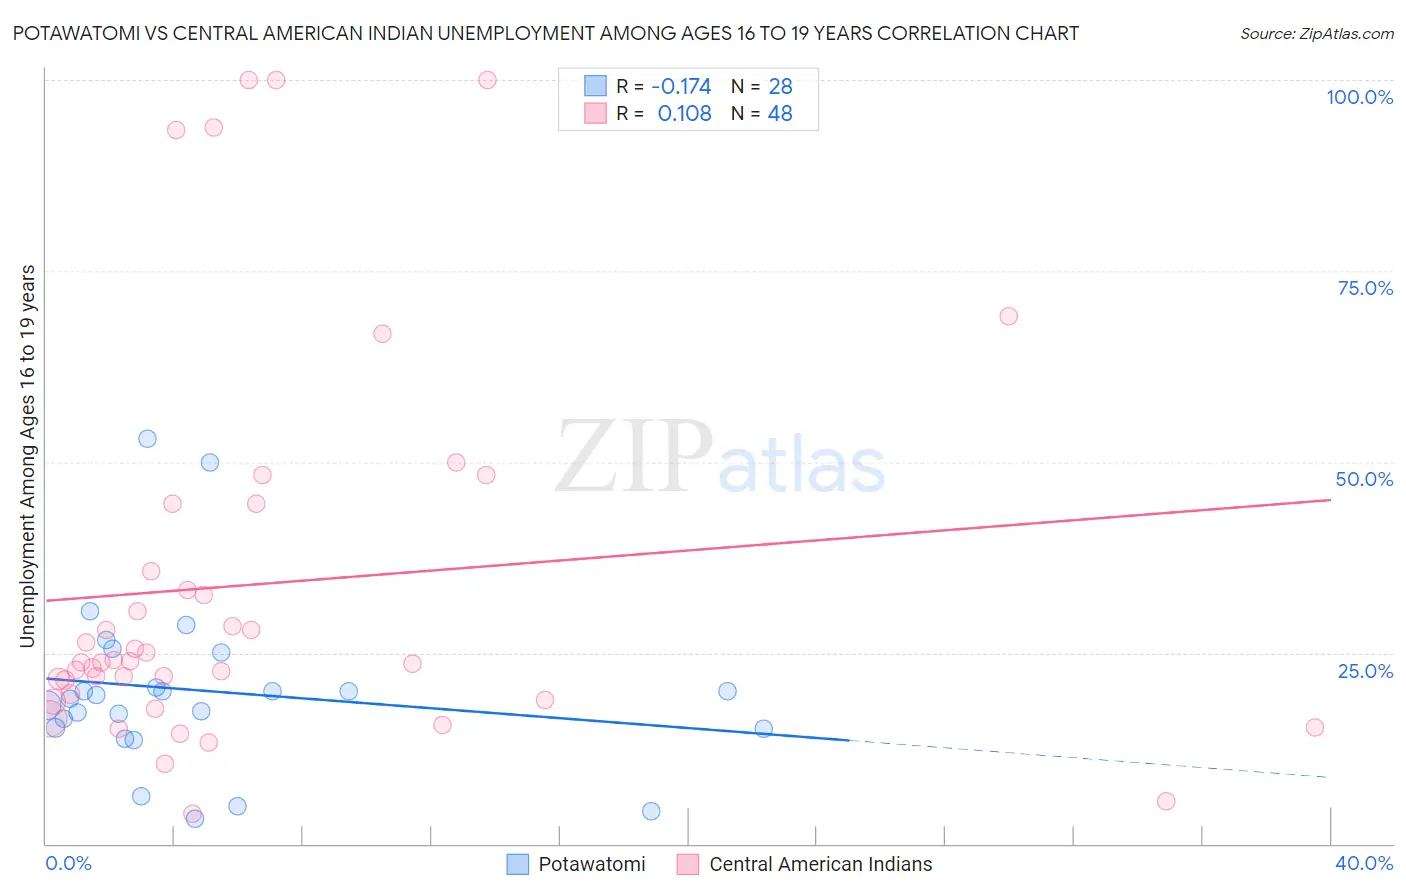 Potawatomi vs Central American Indian Unemployment Among Ages 16 to 19 years